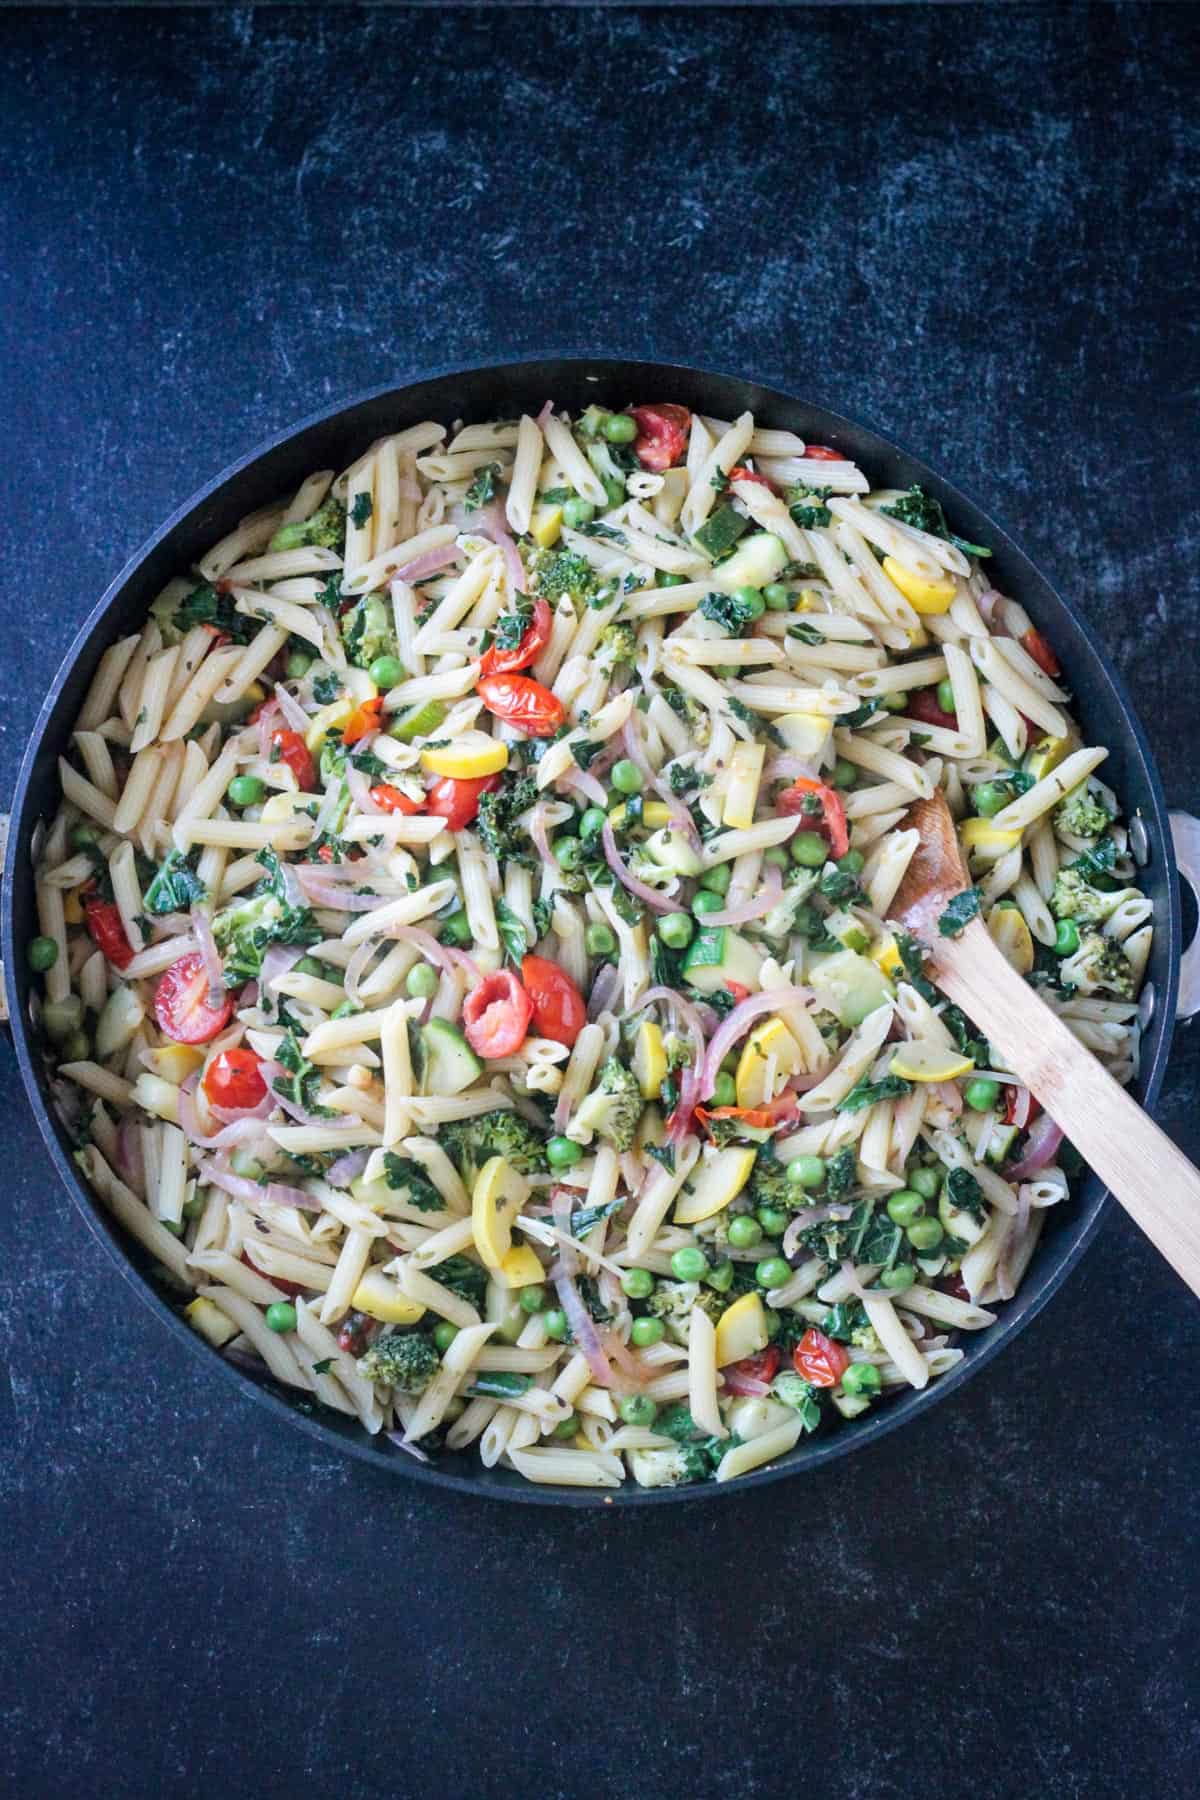 Wooden spoon stirring a skillet of pasta and veggies.